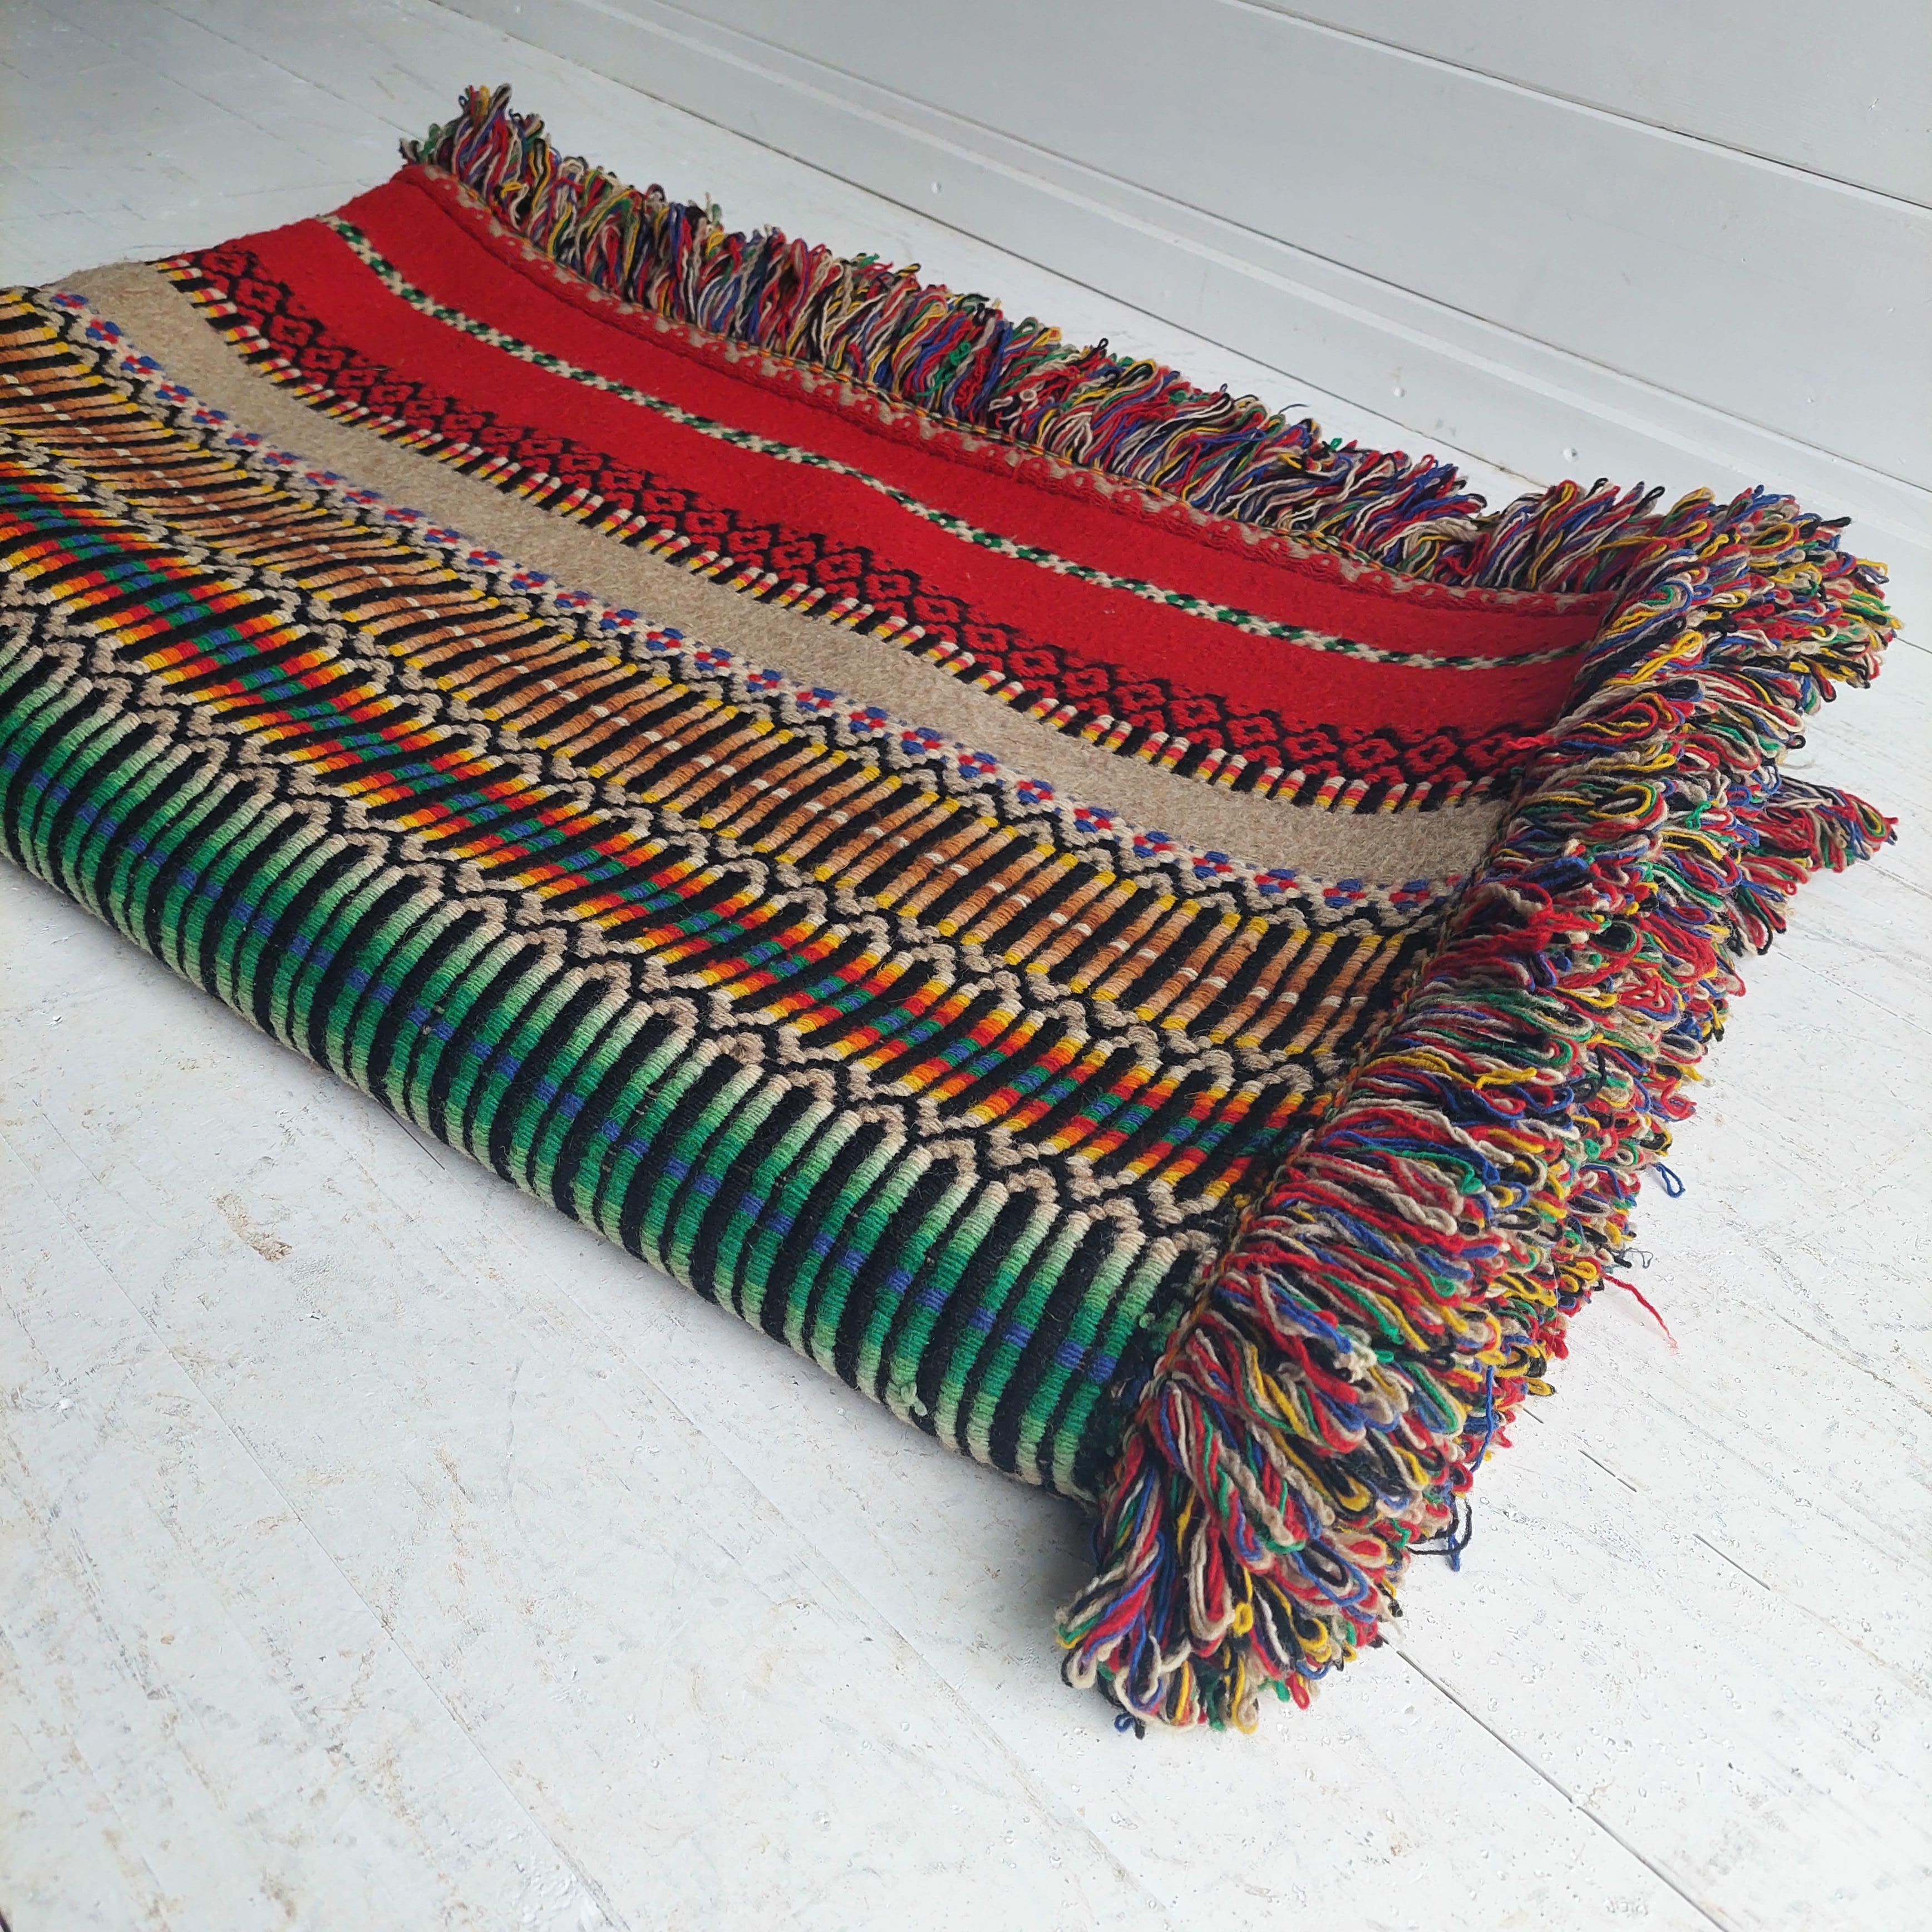 Beautiful hand made 100% wool Portuguese vintage blanket.
With intricate colourful patterns this blanket really pops.

These came out portugal from a trip during the 70s and are hard to find.

Offered here is a colorful hand woven heavyweight